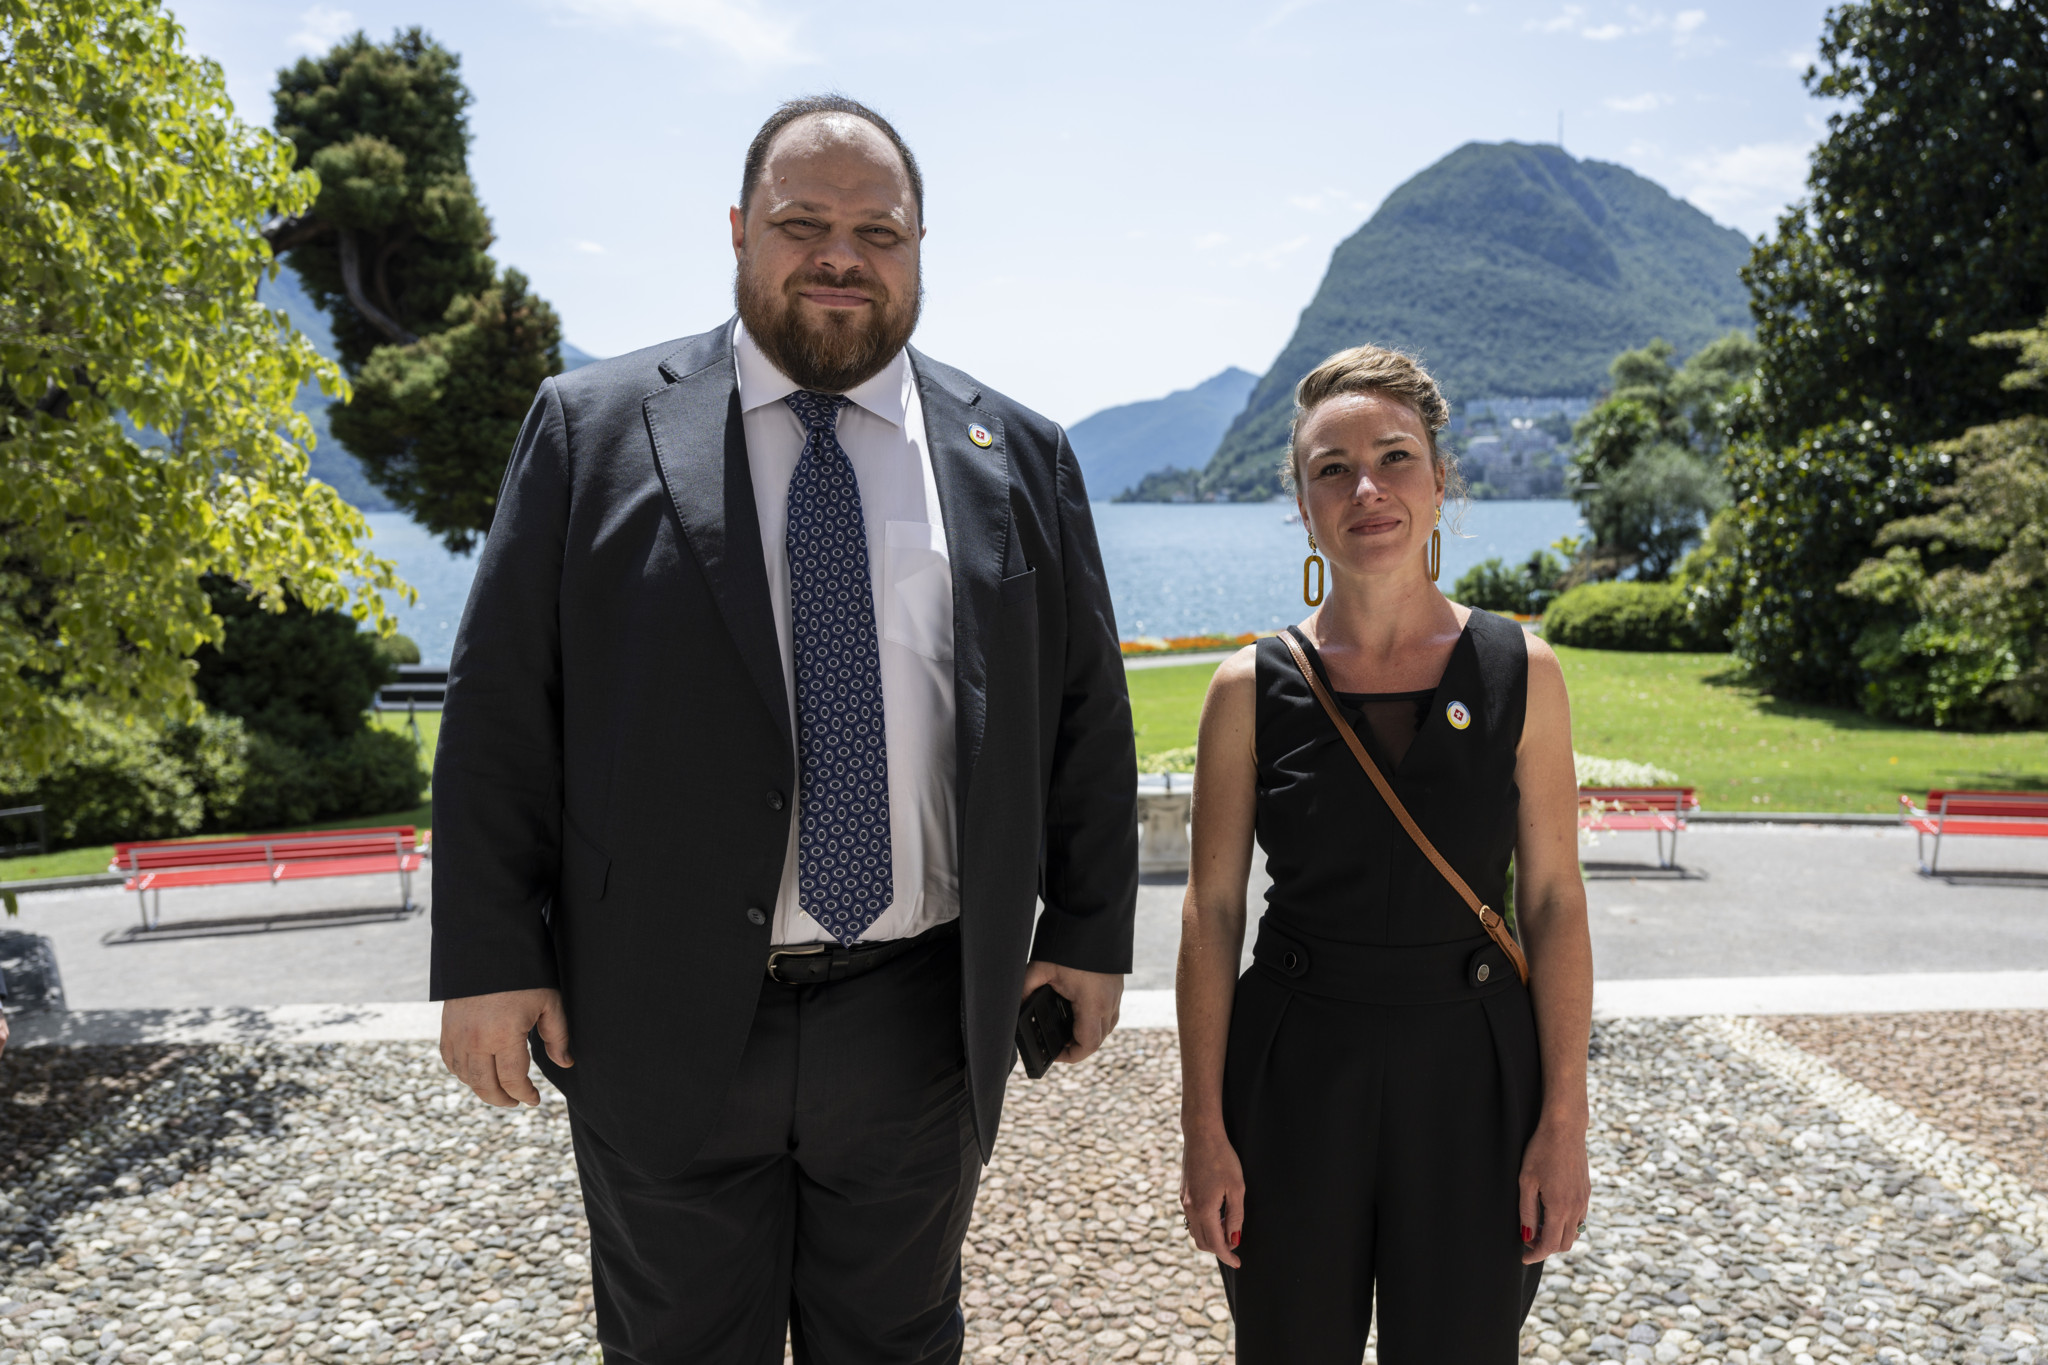 Ukrainian Speaker of the Verkhovna Rada, Ruslan Stefanchuk, left, and his Swiss counterpart, President of the National Council, Irene Kaelin, stand for a photo during the Ukraine Recovery Conference URC, Monday, July 4, 2022 in Lugano, Switzerland. The URC is organised to initiate the political process for the recovery of Ukraine after the attack of Russia to its territory. (KEYSTONE/EDA/Alessandro della Valle)